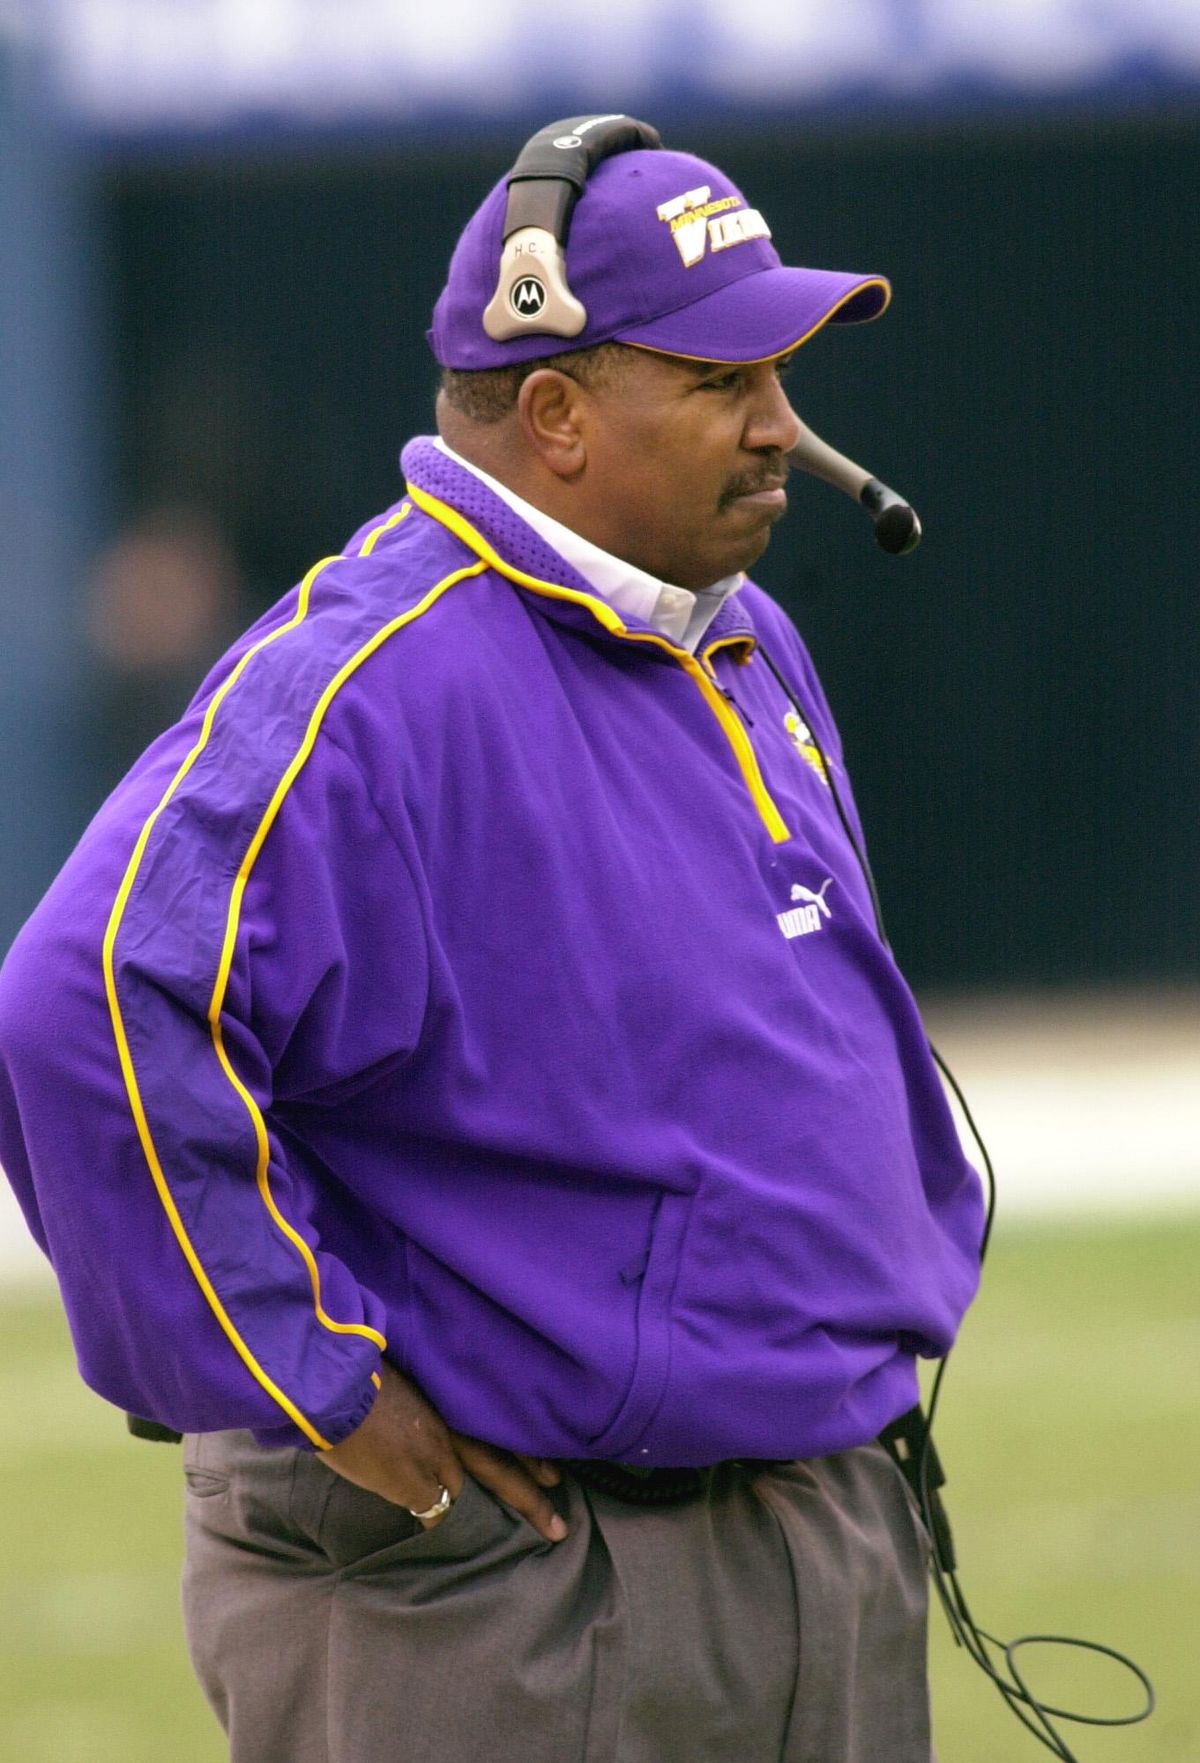 Head coach Dennis Green had many memorable moments with Minnesota, but watching the Vikings lose 41-0 to the New York Giants in the NFC championship game after the 2000 season wasn’t one of them. (BILL KOSTROUN / Associated Press)